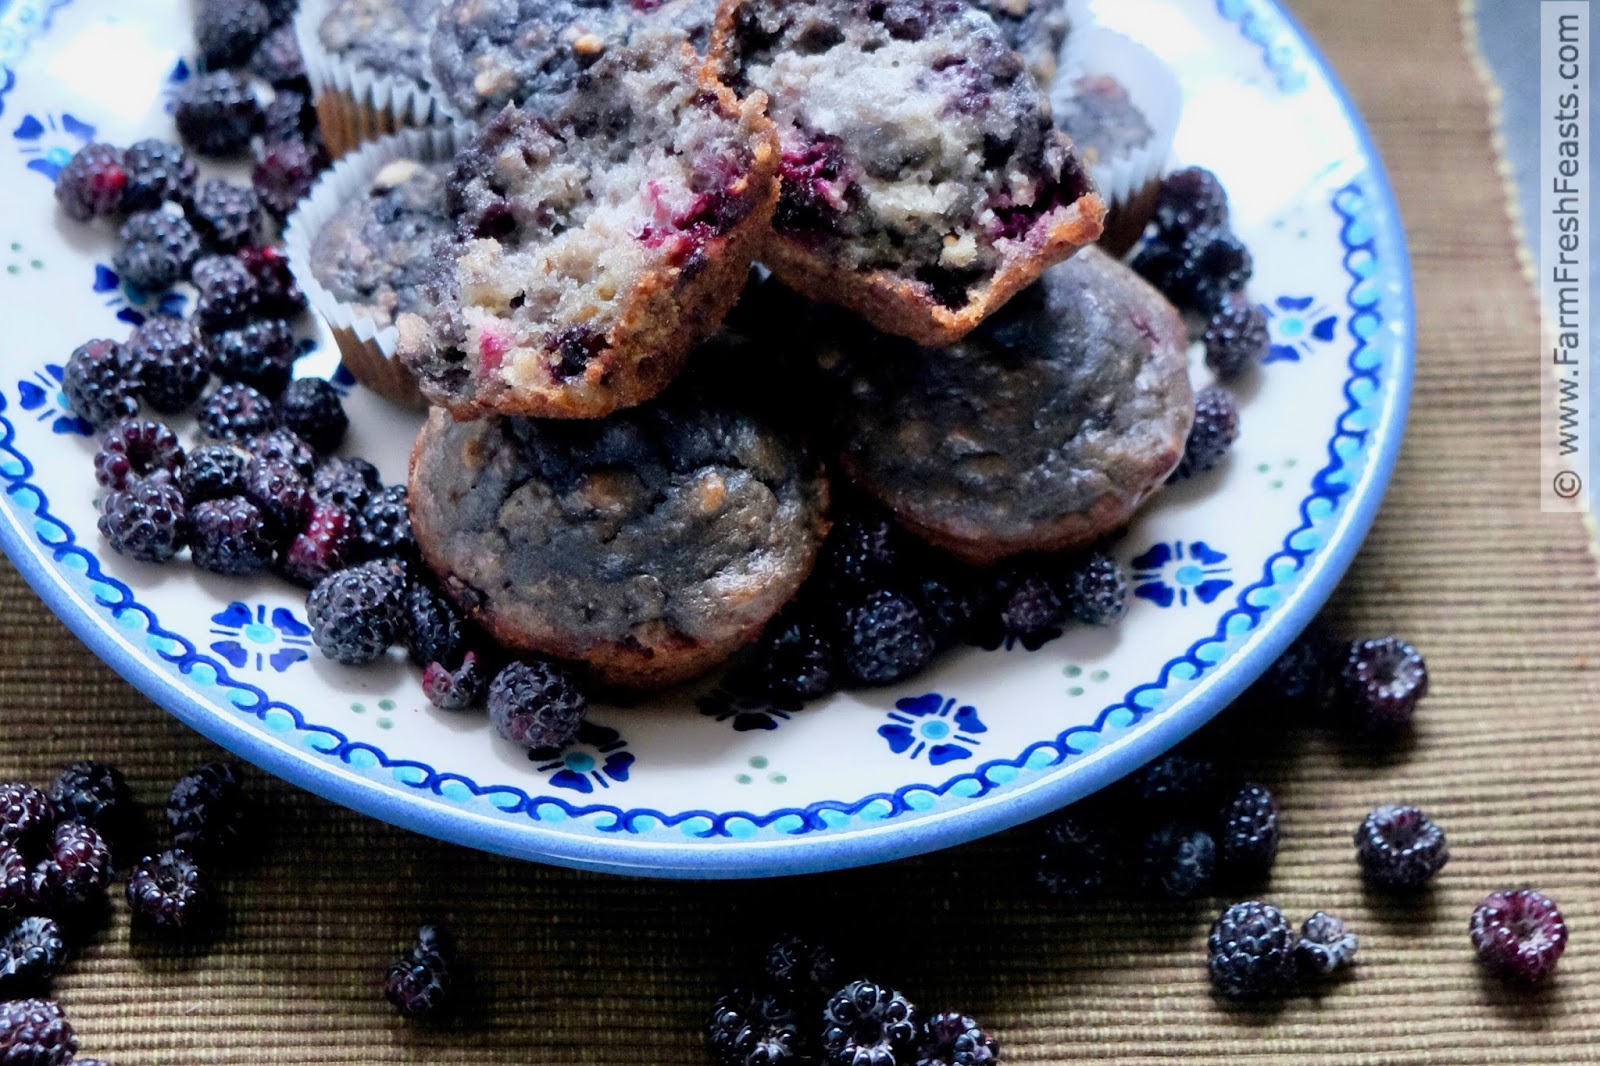 Black raspberry muffins made with soaked oats and sweetened with brown sugar